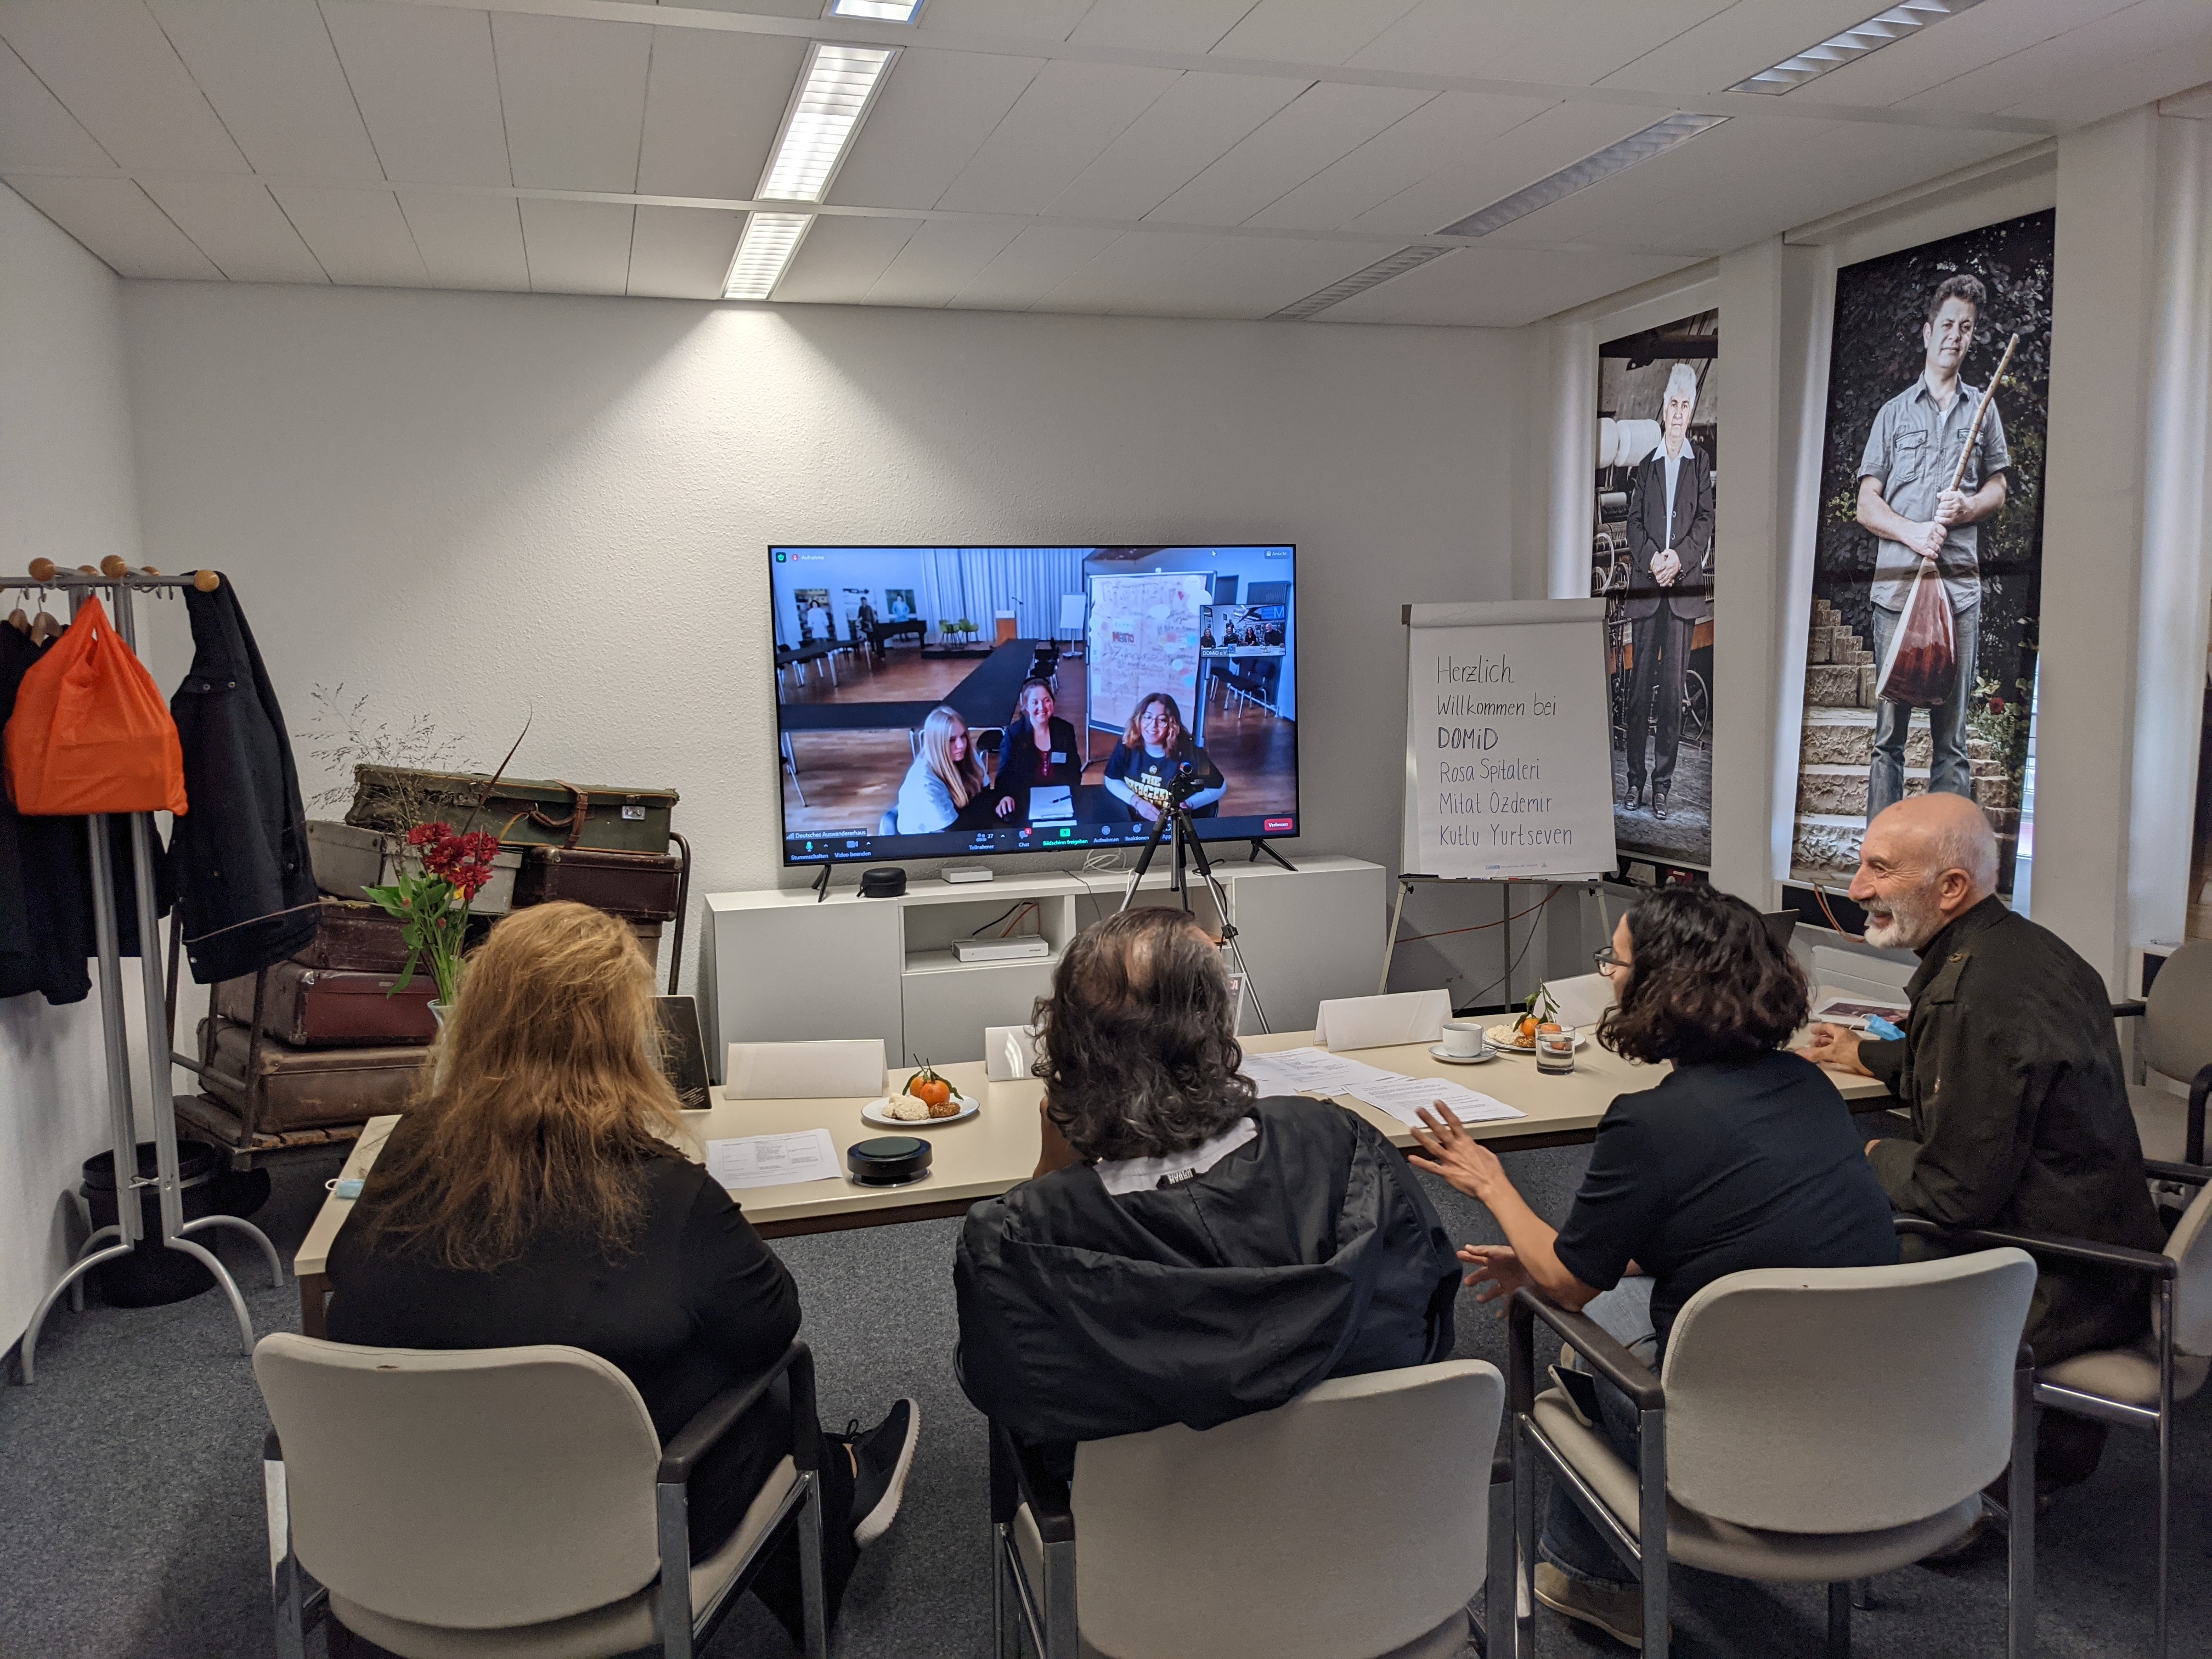 The three contemporary witnesses Rosa Spitaleri, Kutlu Yurtseven and Mitat Özdemir spoke to the two students Fatima and Lily in Bremerhaven in an online format. Photo: DOMiD Archive, Cologne